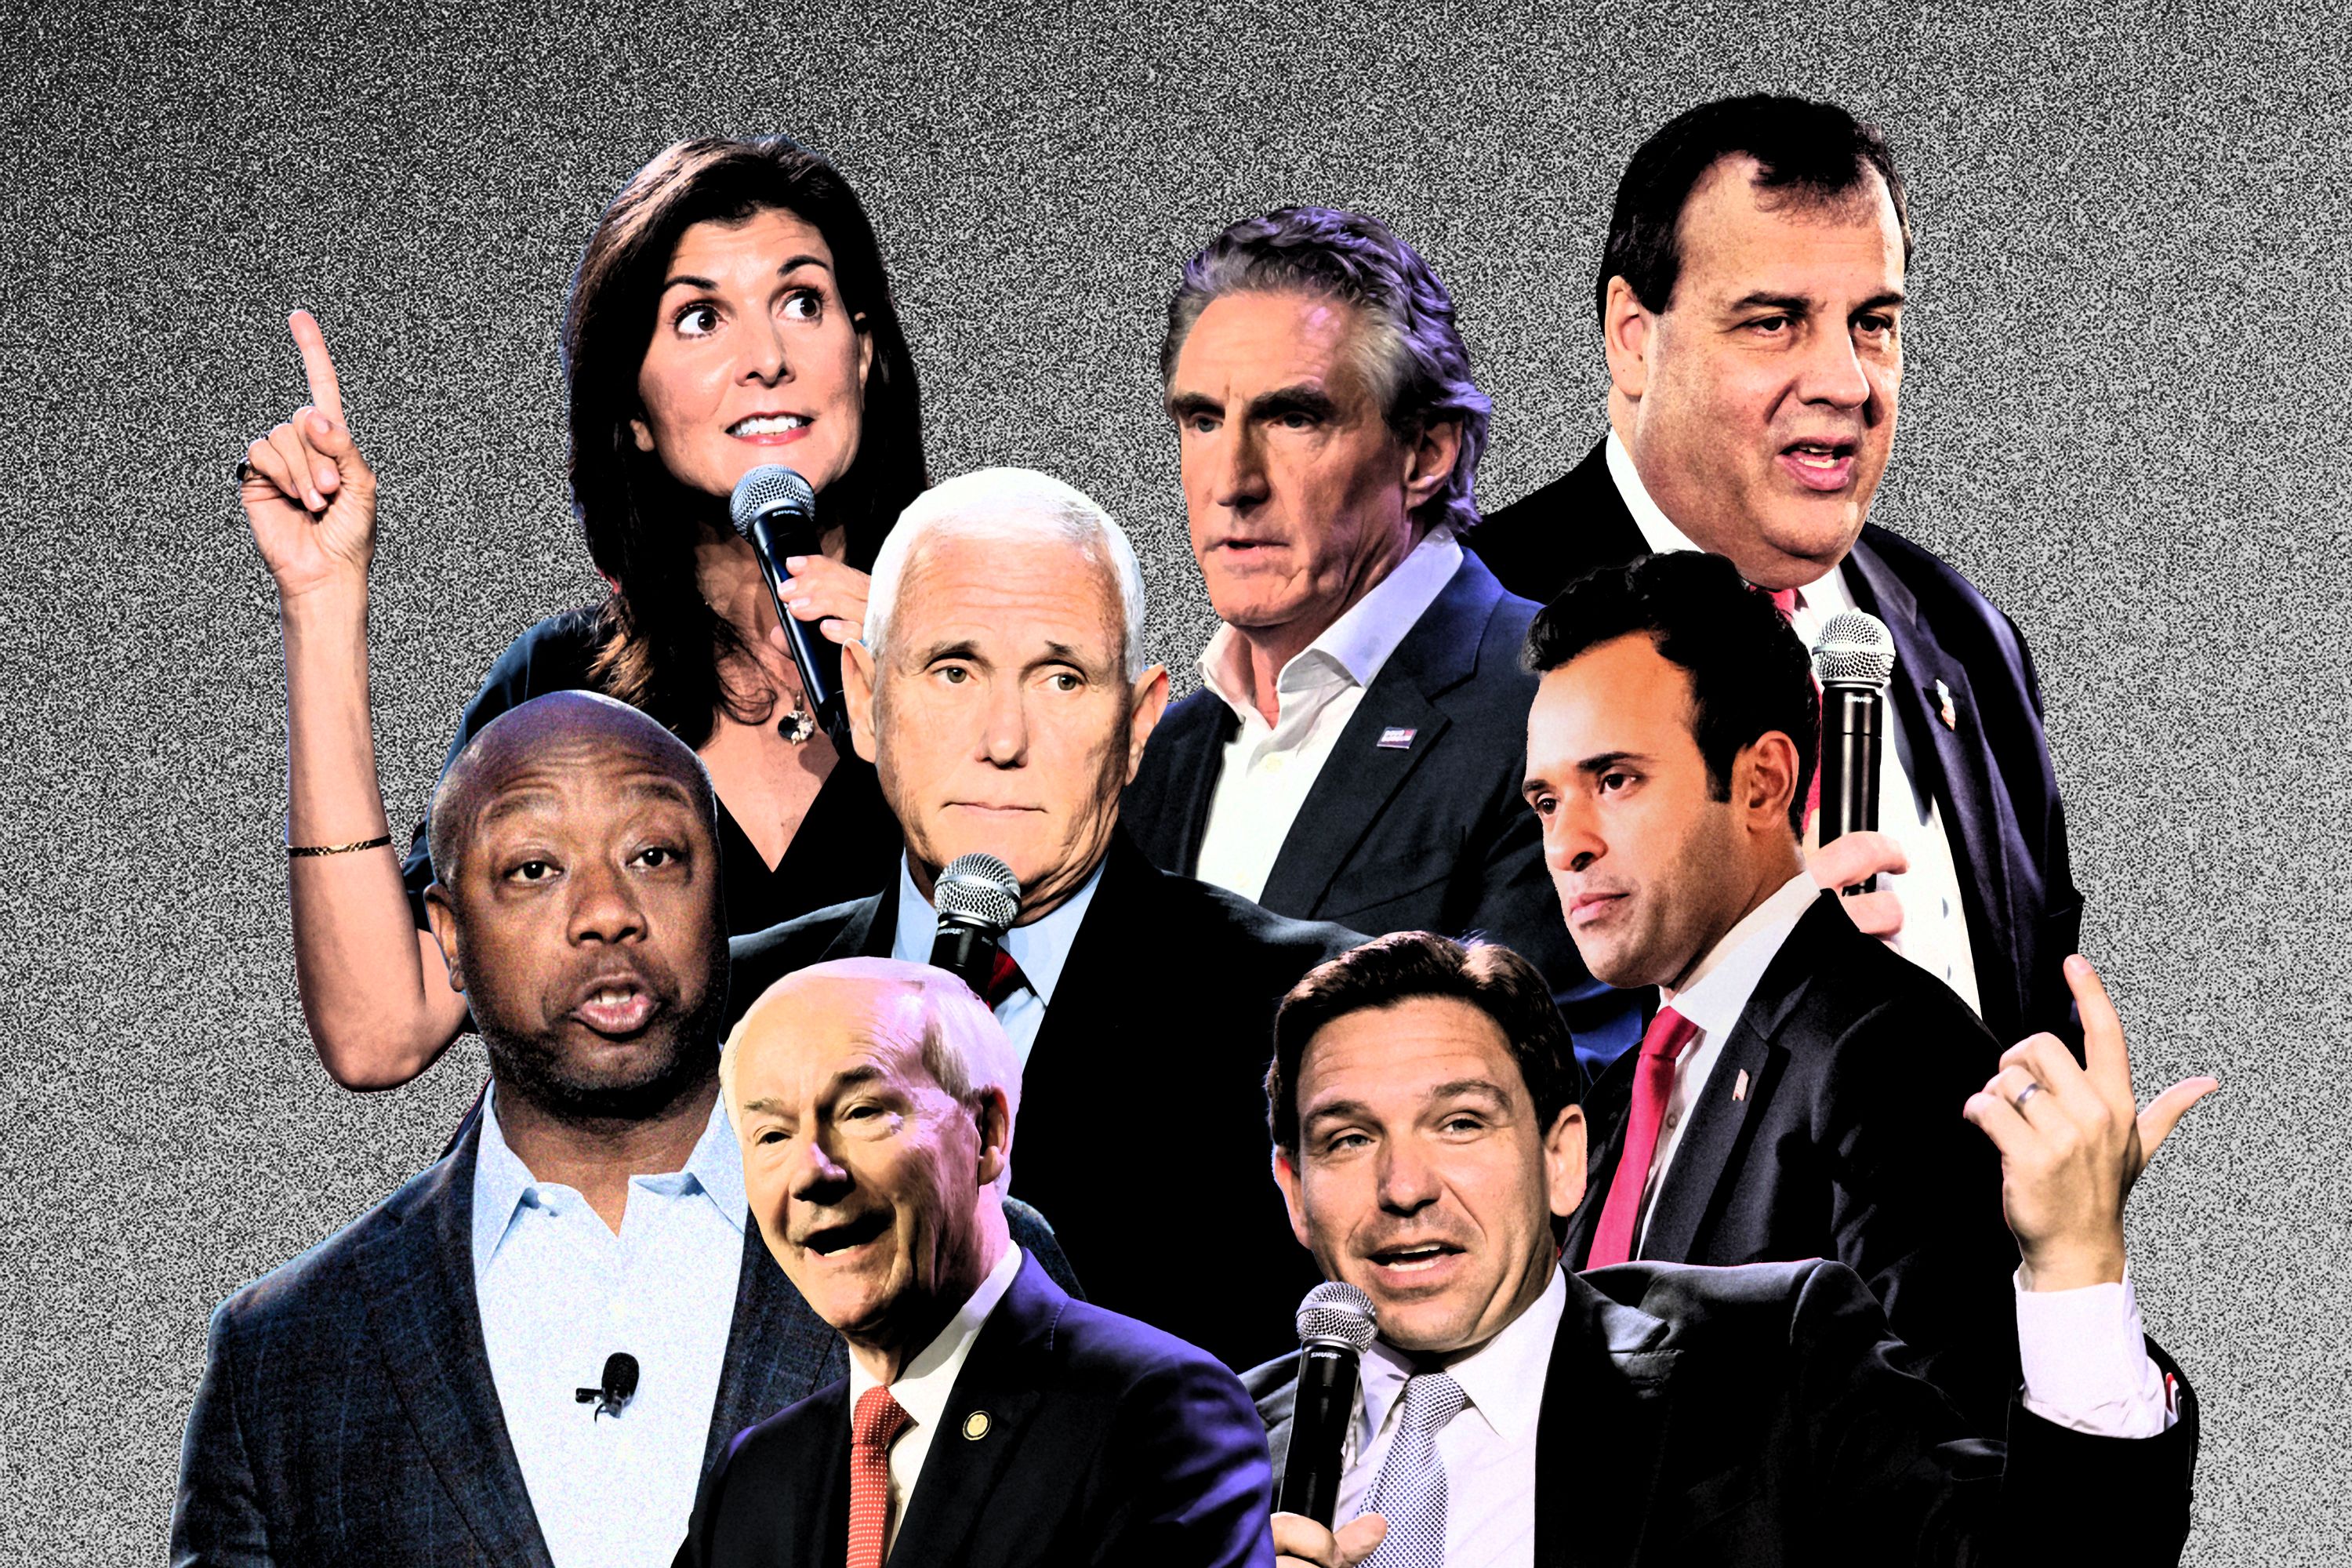 34 Highlights From the First Republican Debate